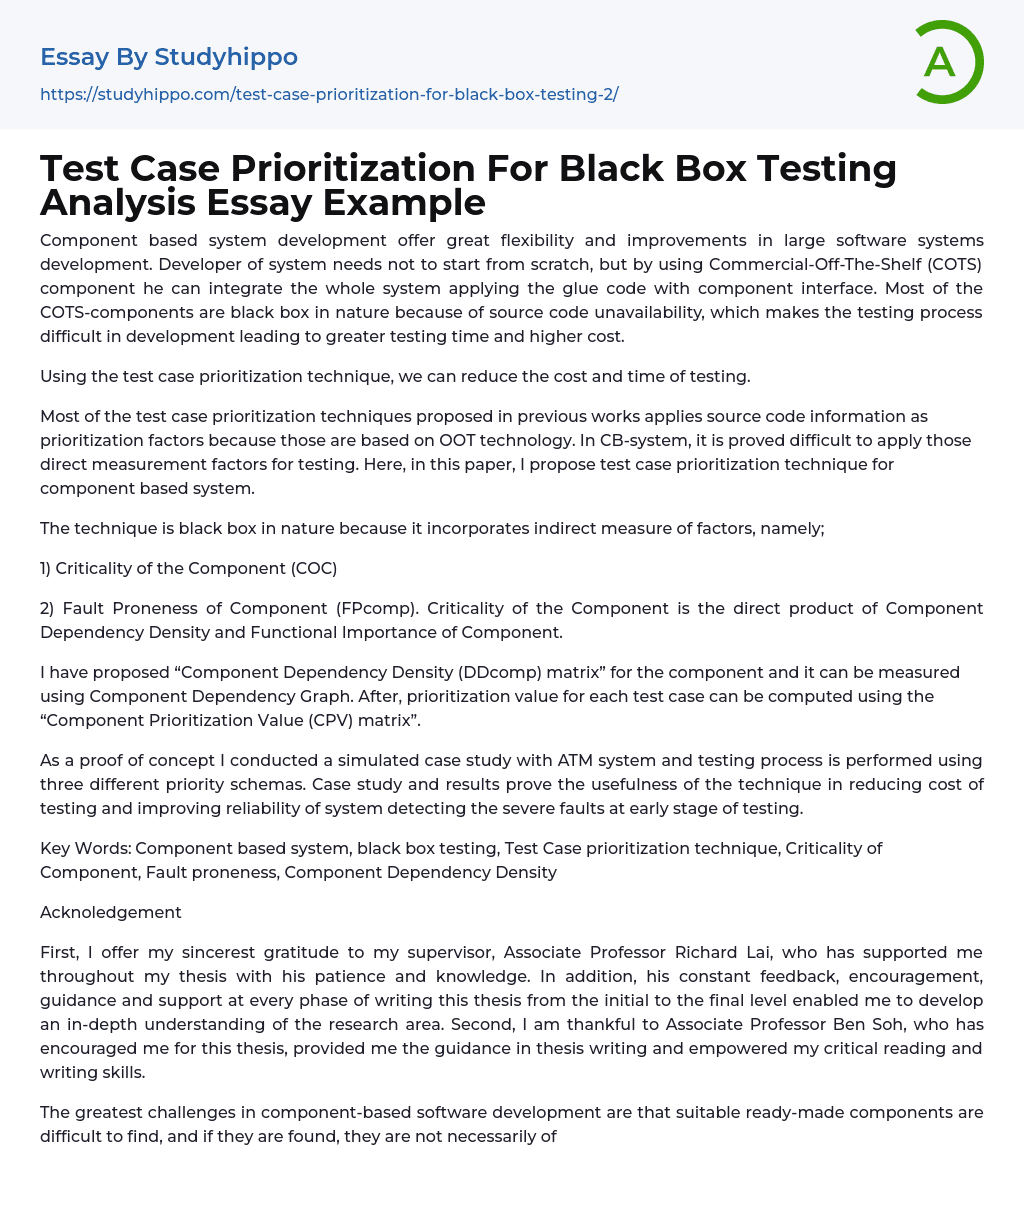 Test Case Prioritization For Black Box Testing Analysis Essay Example